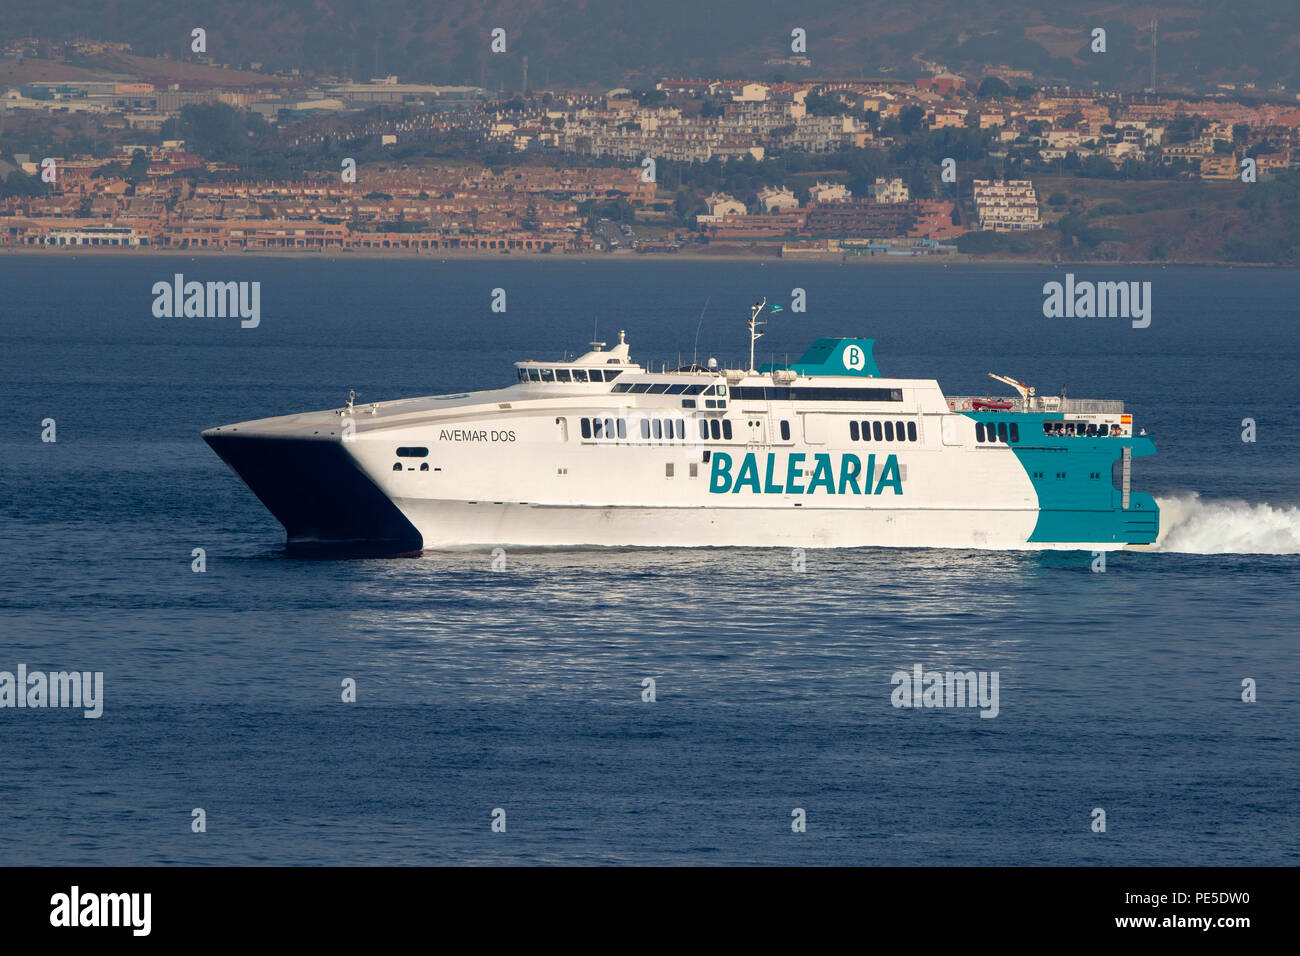 Avemar Dos Fast ferry owned by Balearia Spanish shipping line passenger and cargo services in Straits of Gibraltar Stock Photo